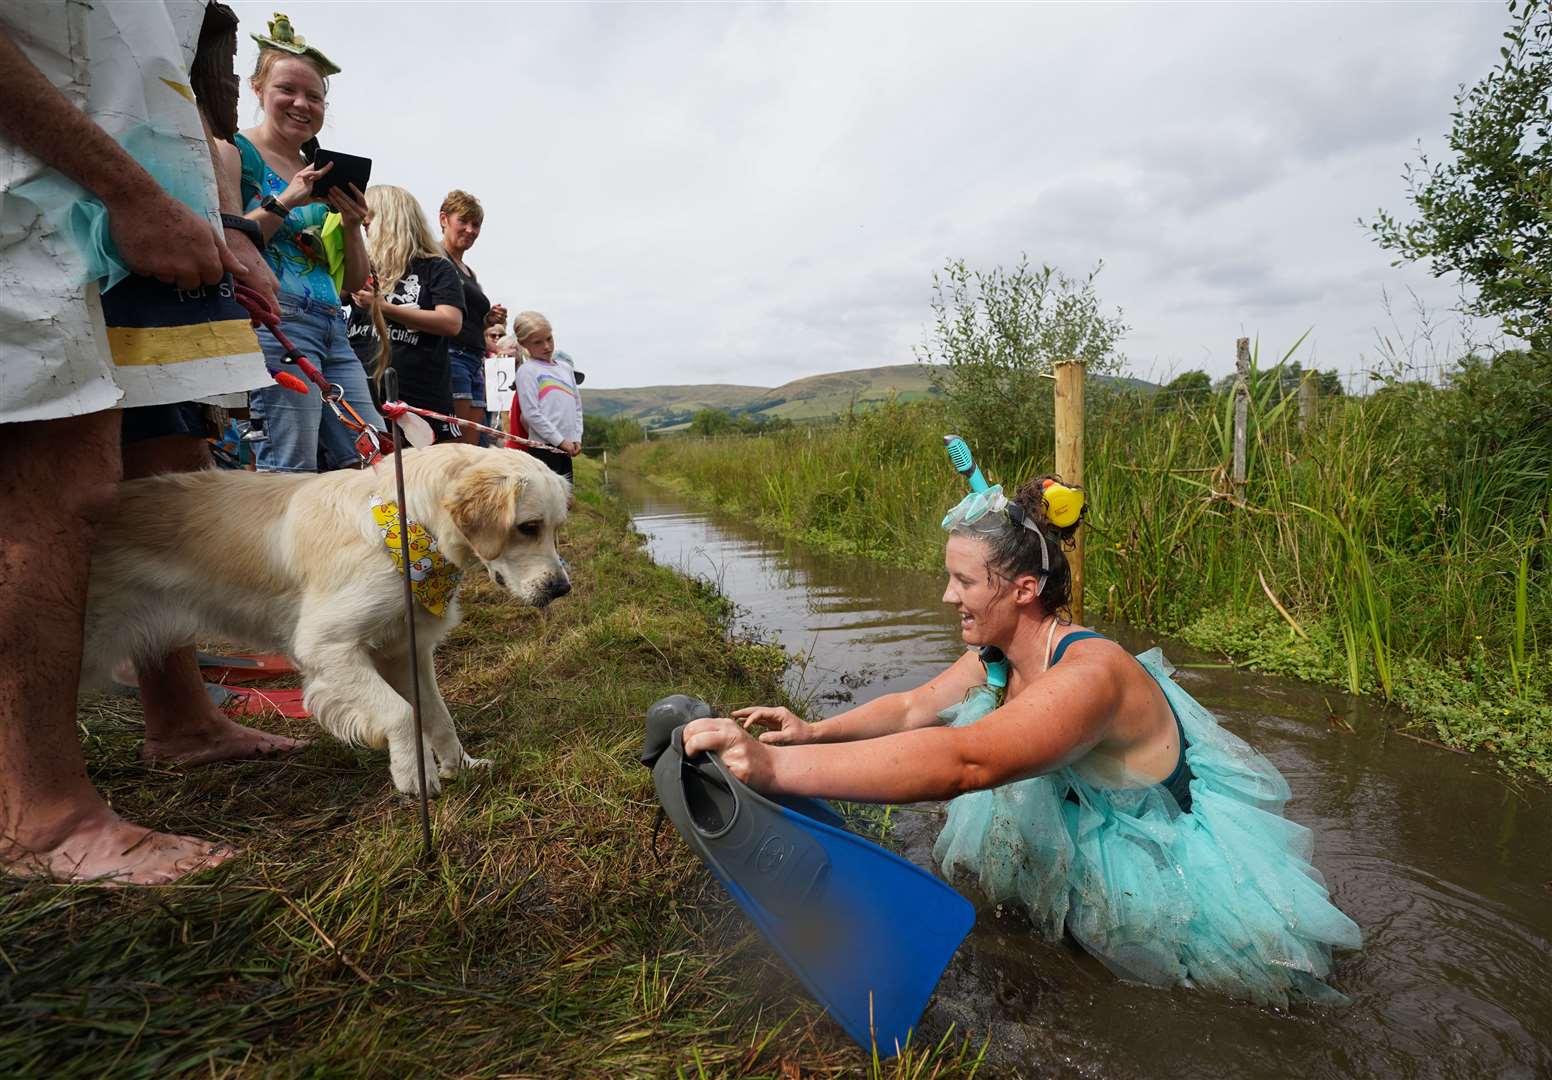 Louise Wild is greeted by her dog after taking part in the Rude Health World Bog Snorkelling Championships at Waen Rhydd peat bog in Llanwrtyd Wells, Wales (Joe Giddens/PA)